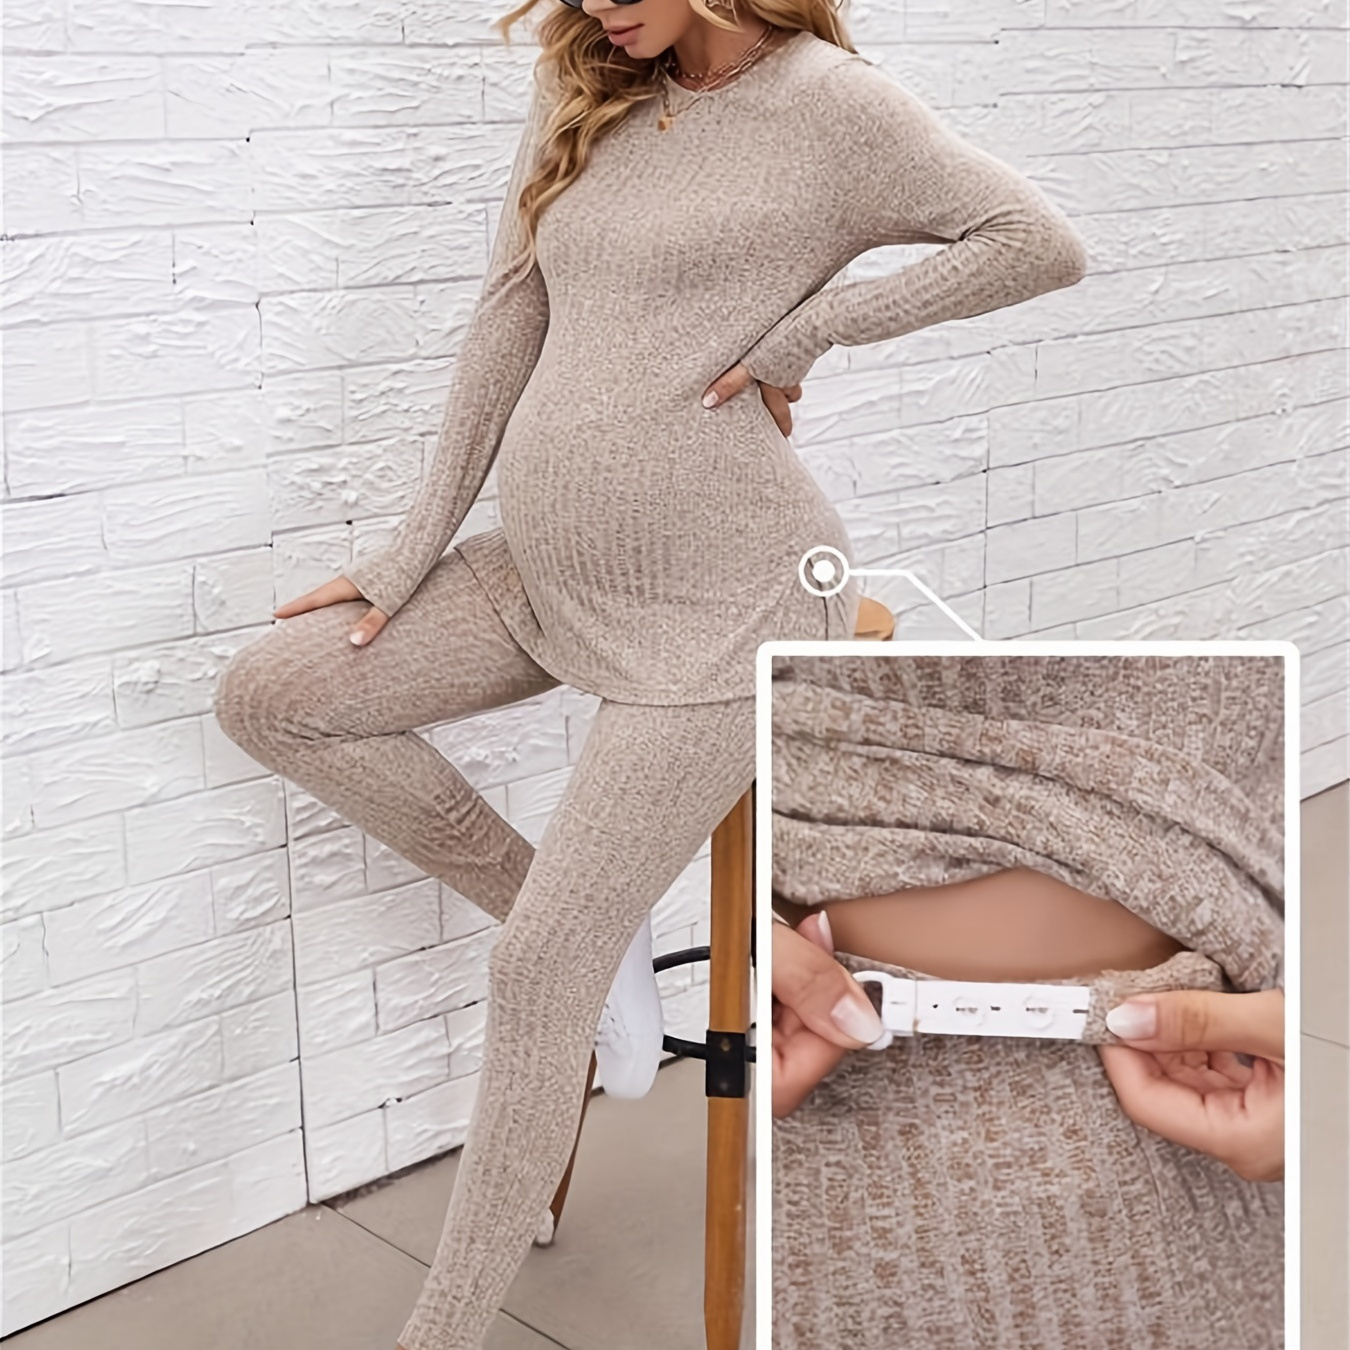 

Pregnant Women's Maternity Knitted Solid Pajamas Sets, Casual Elegant Long Sleeve Crew Neck Shirt & Comfy Adjustable Elastic Fit Pants For Daily Comfort